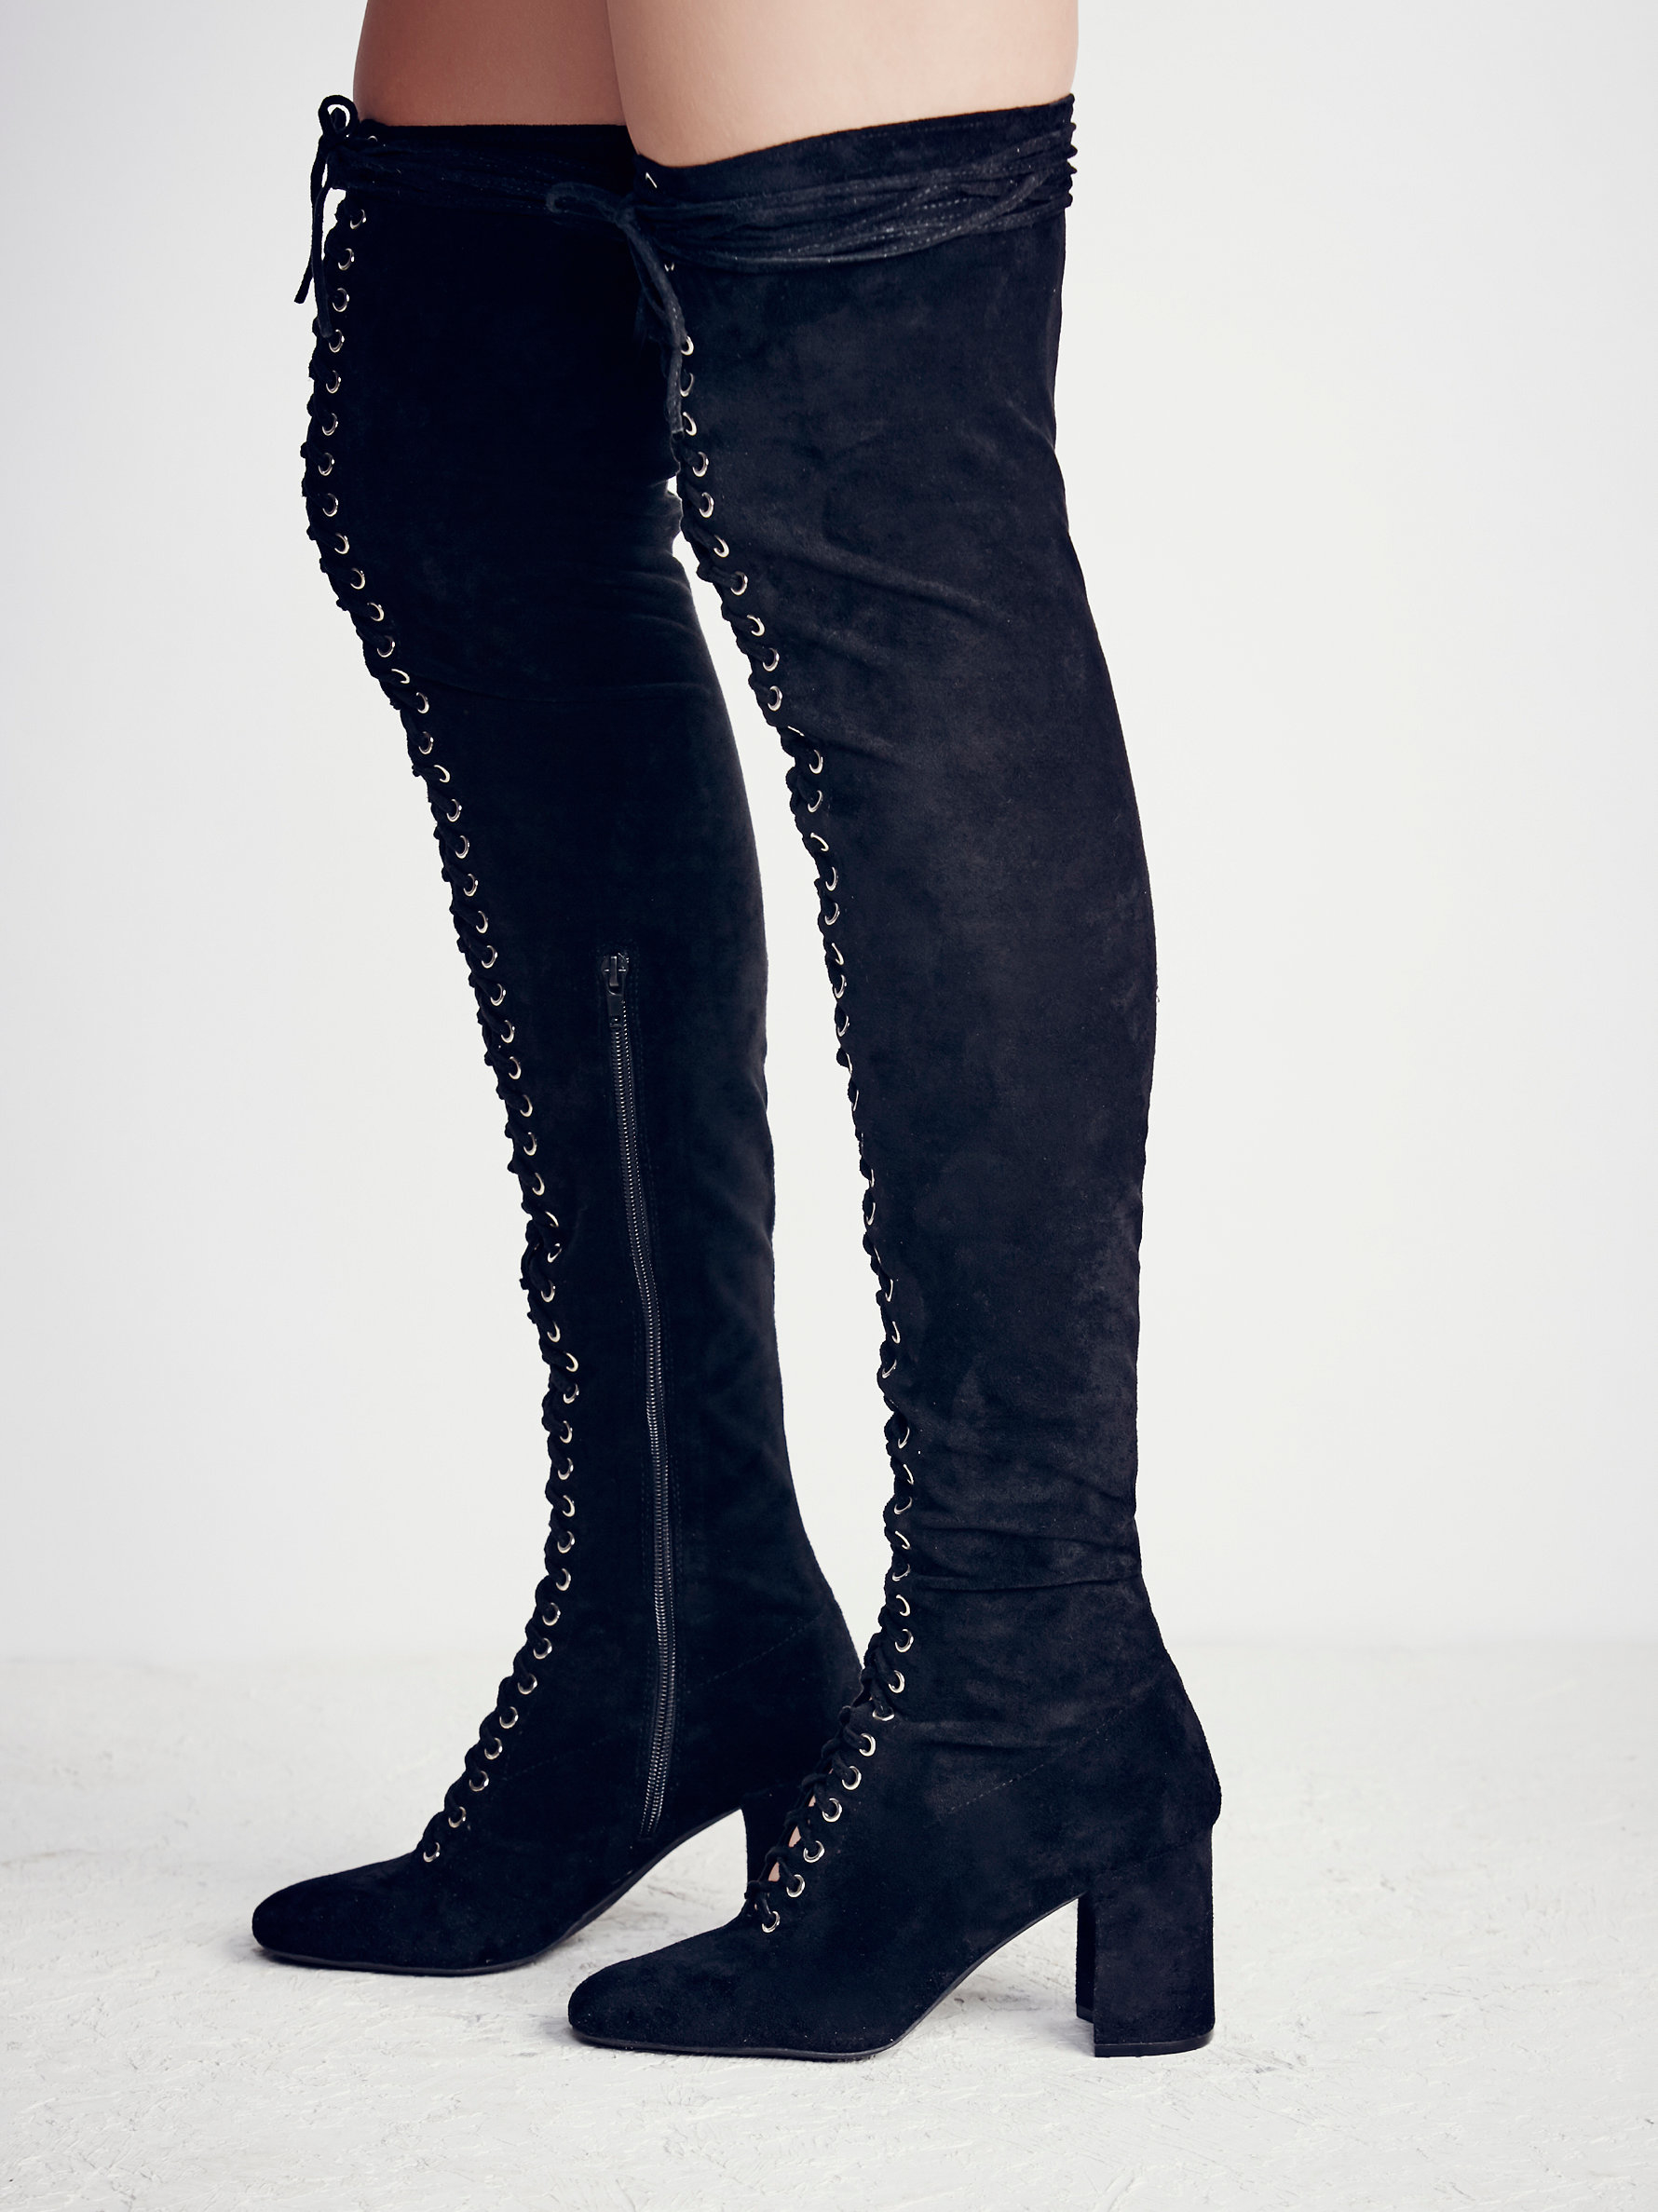 Free people Laila Thigh High Boot in Black | Lyst